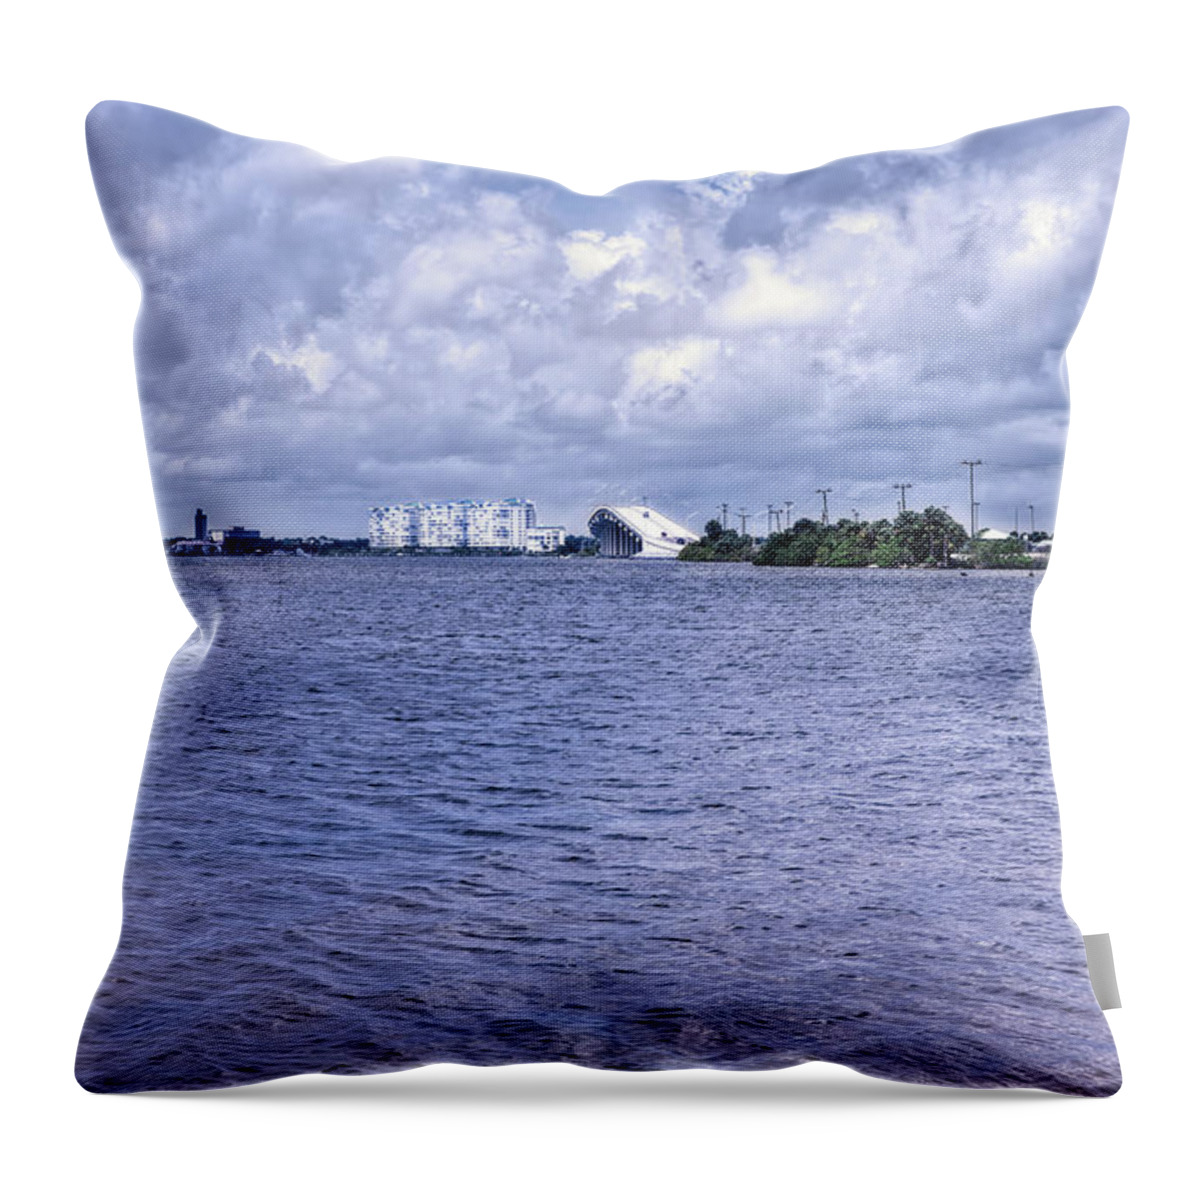 Landscape Throw Pillow featuring the photograph Across the River by John M Bailey